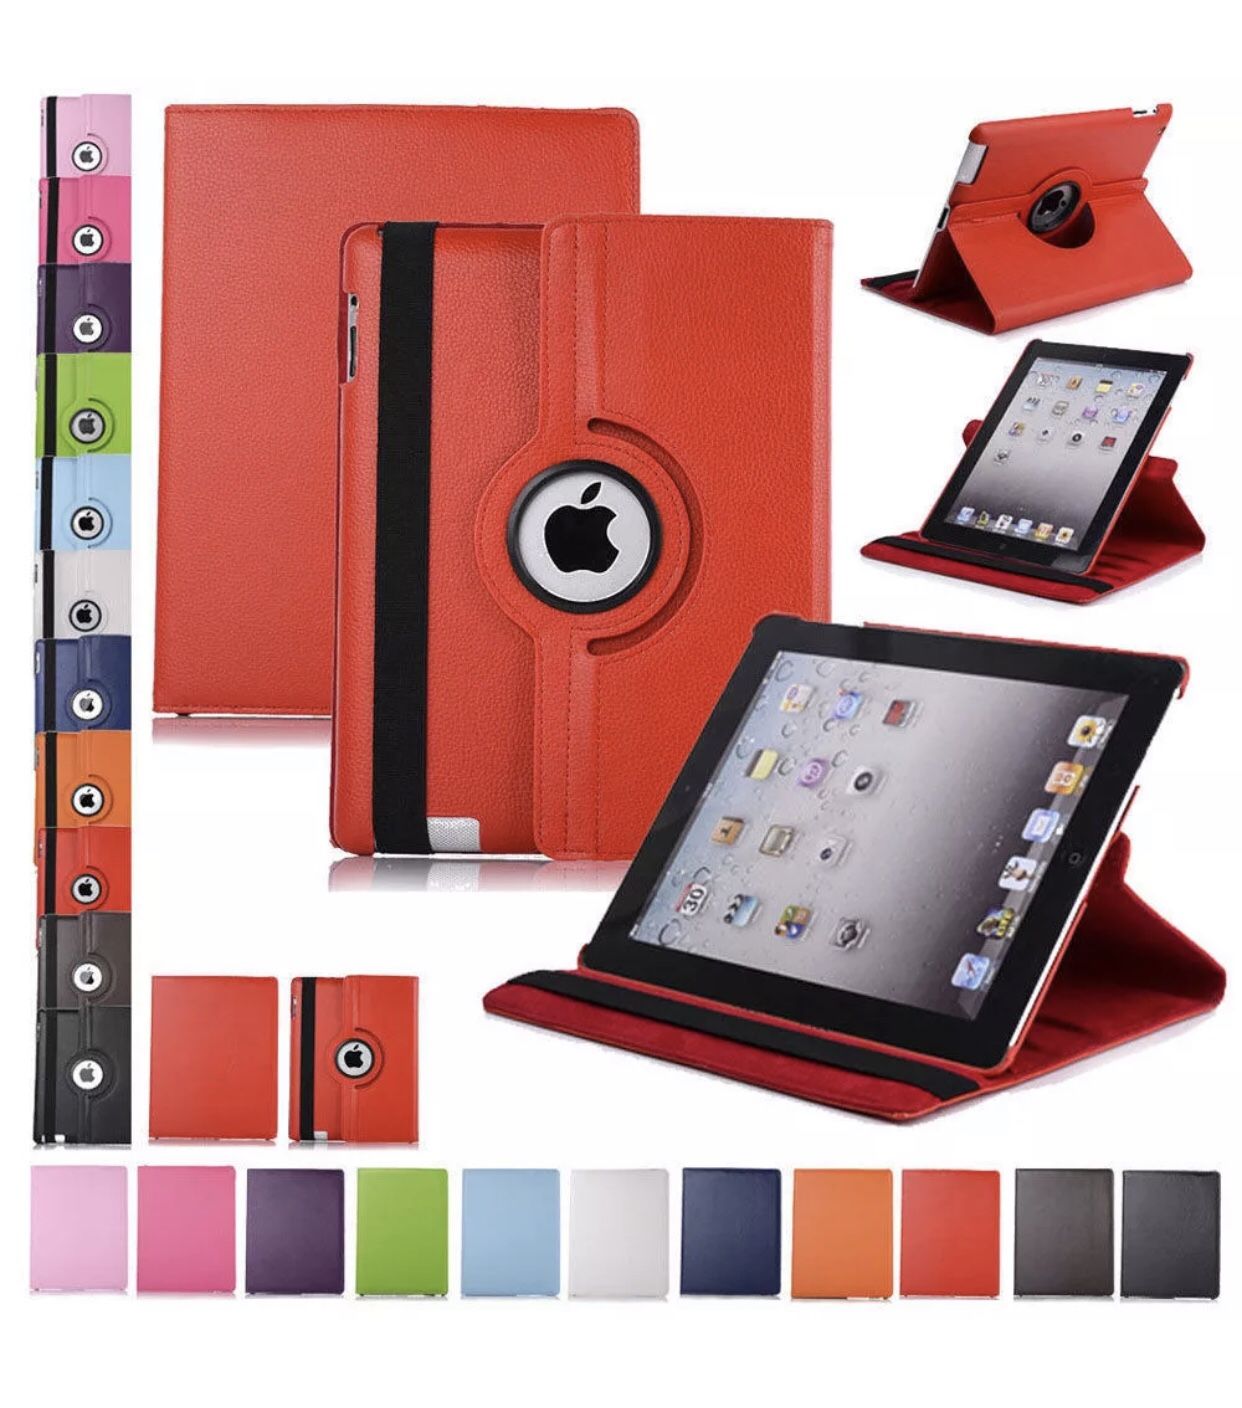 3 Apple ipad cases- red, rose and blue. $5 each! BRAND NEW!